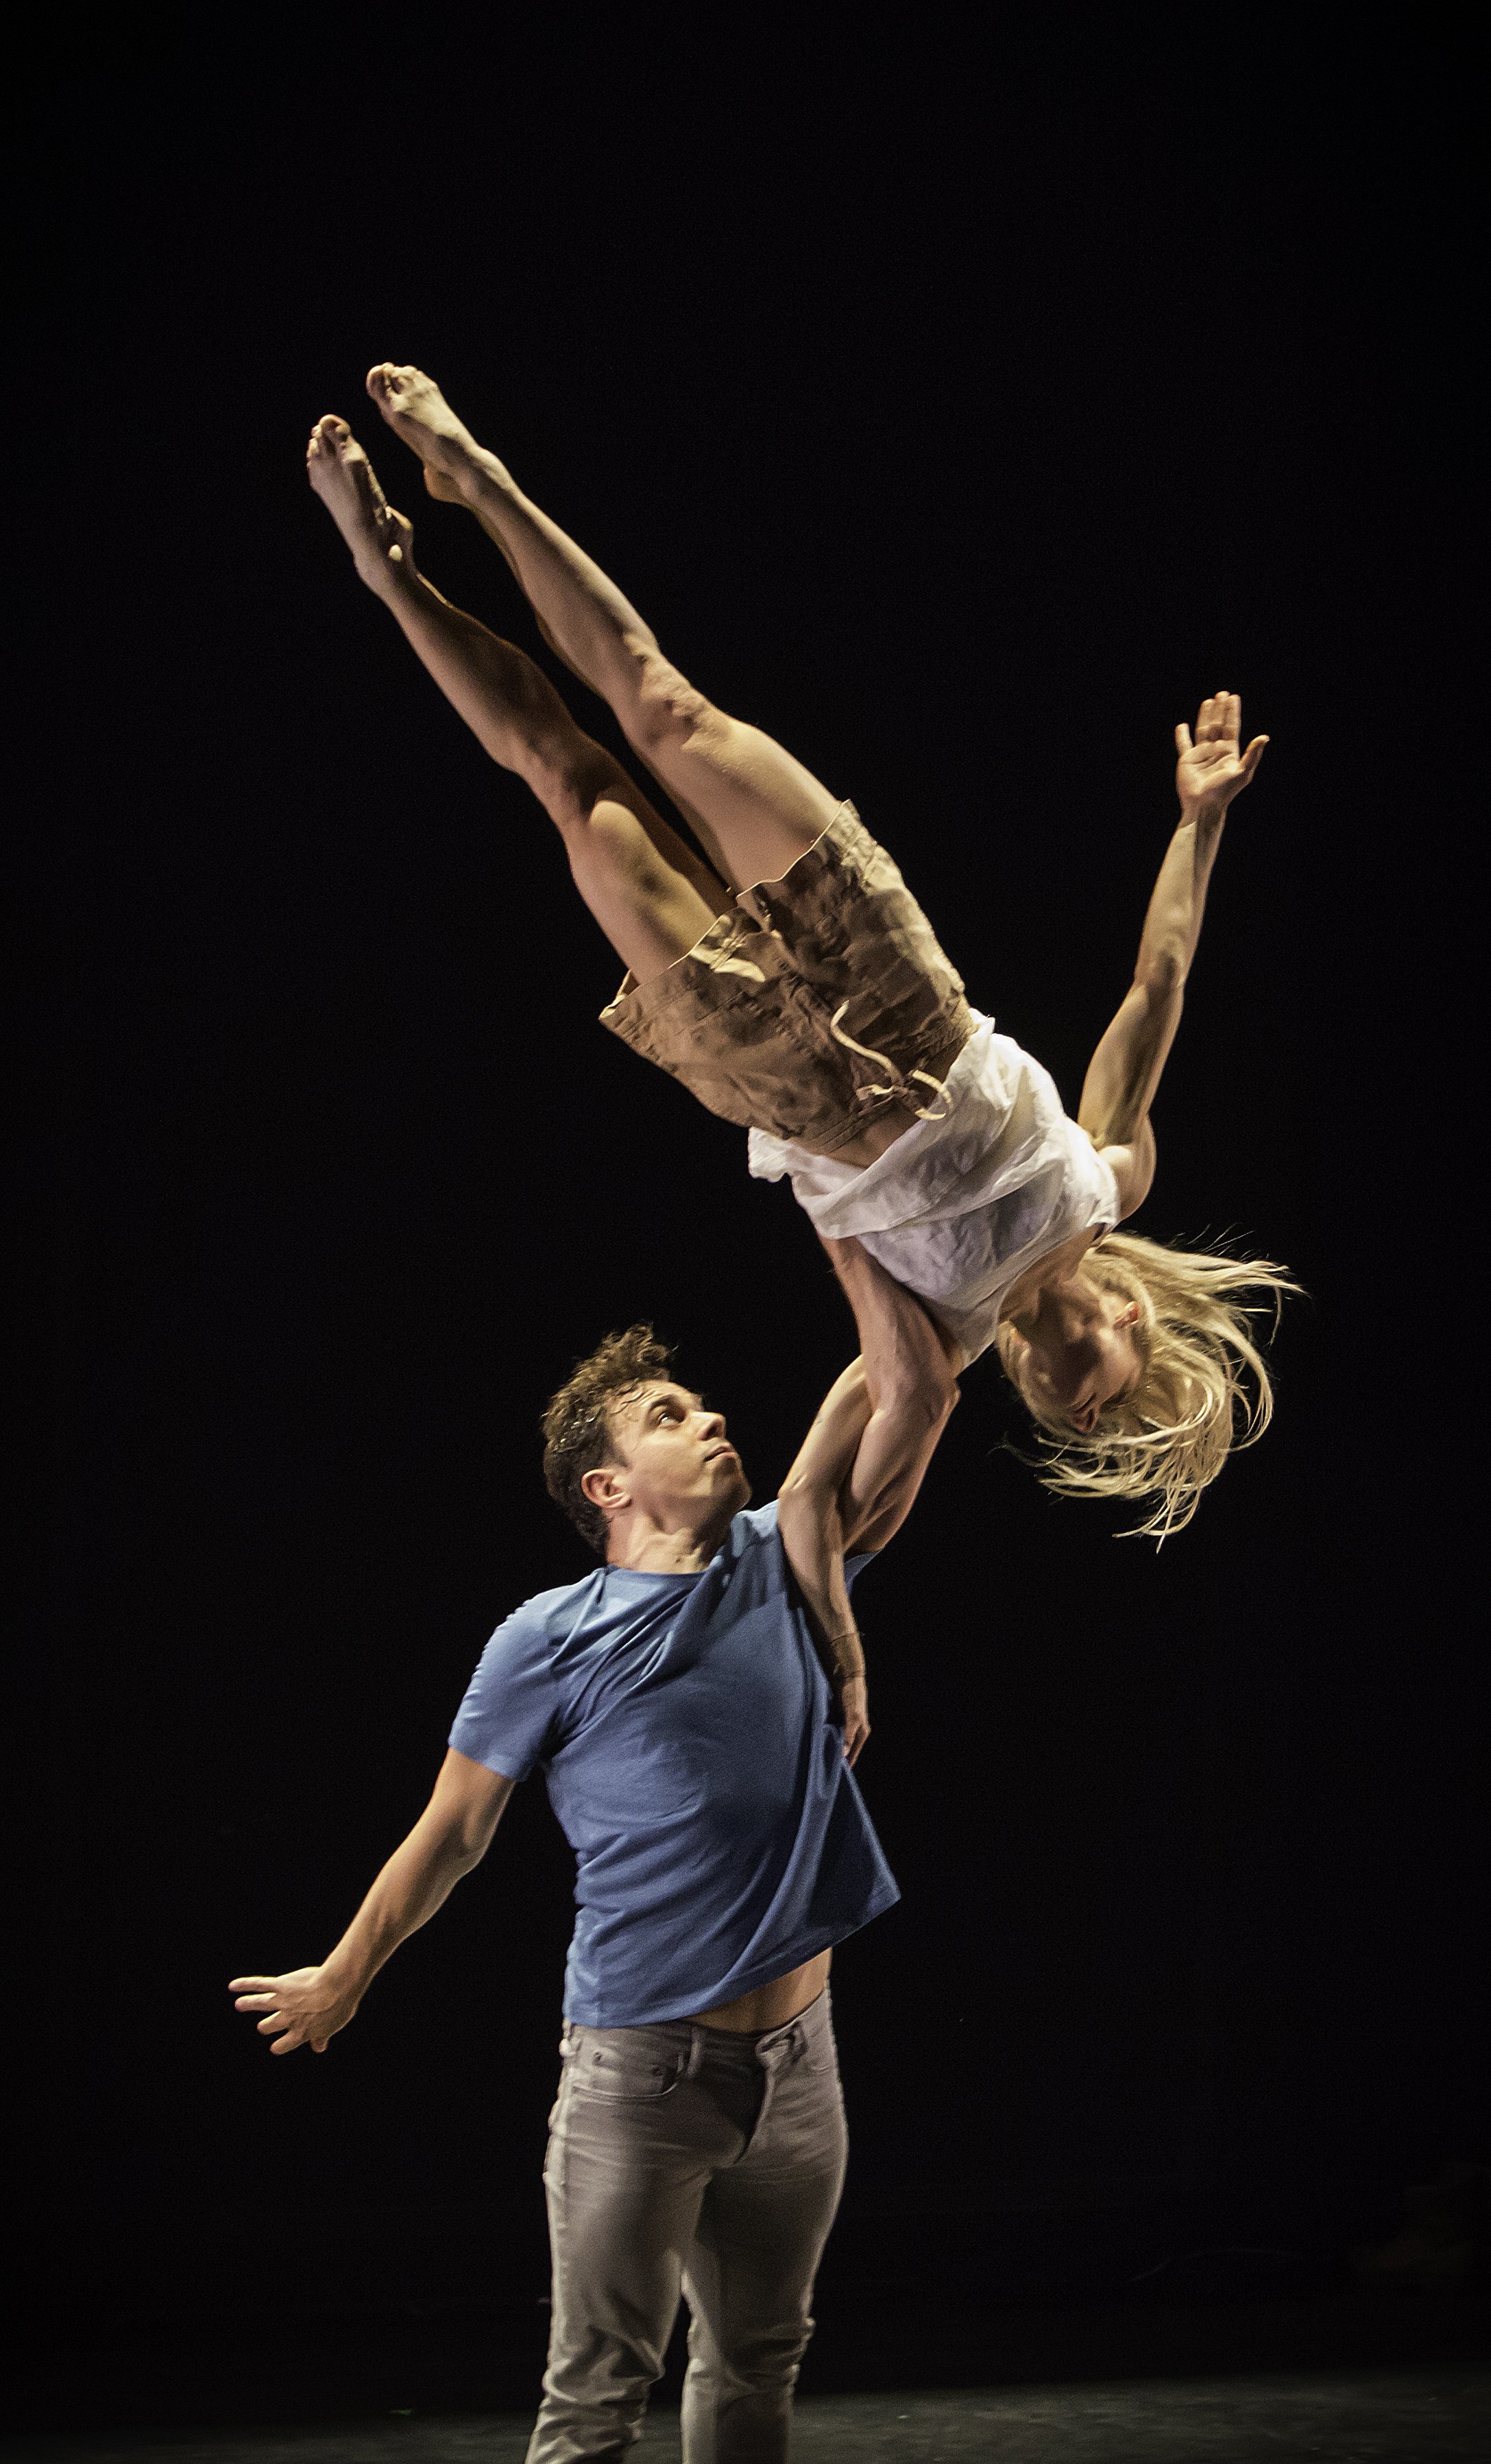 One dancer lifts another above their head.